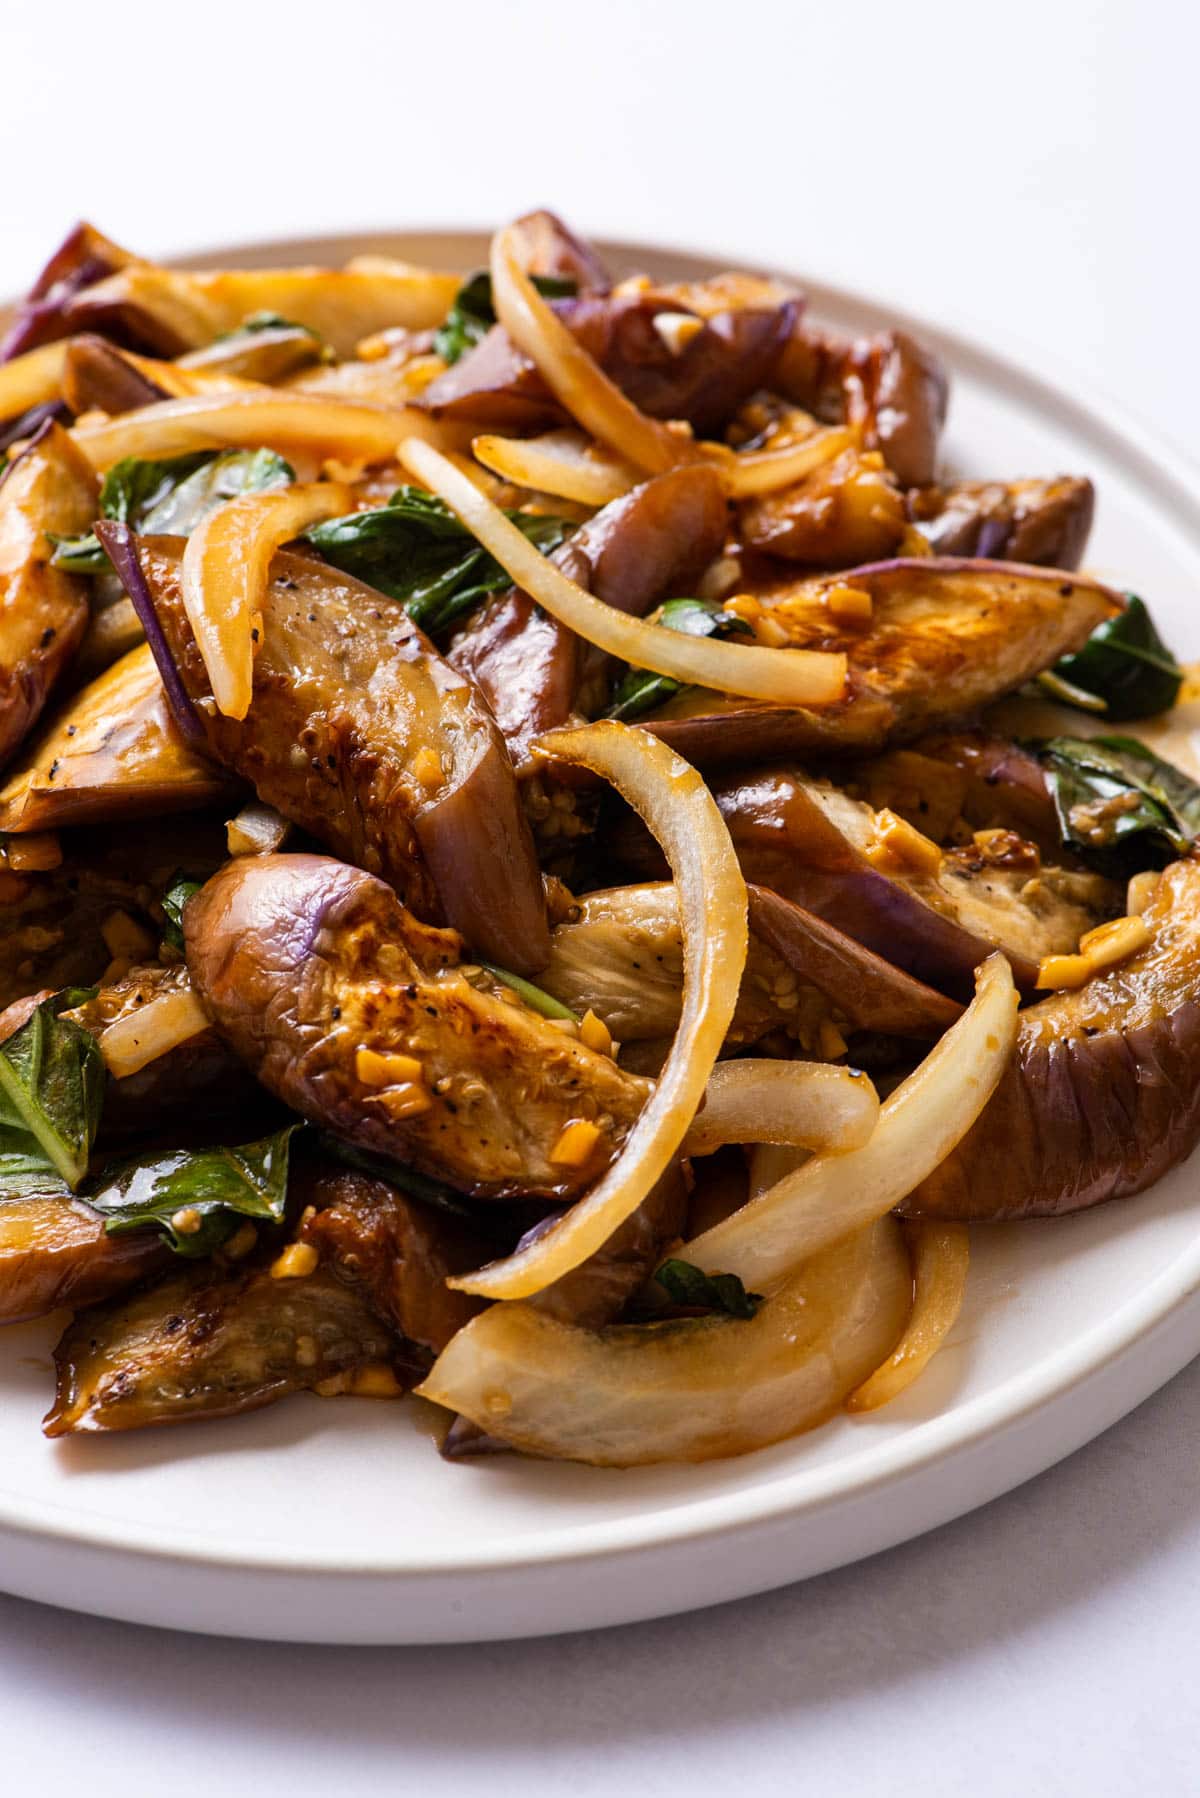 Chinese eggplant stir-fry on a white plate.